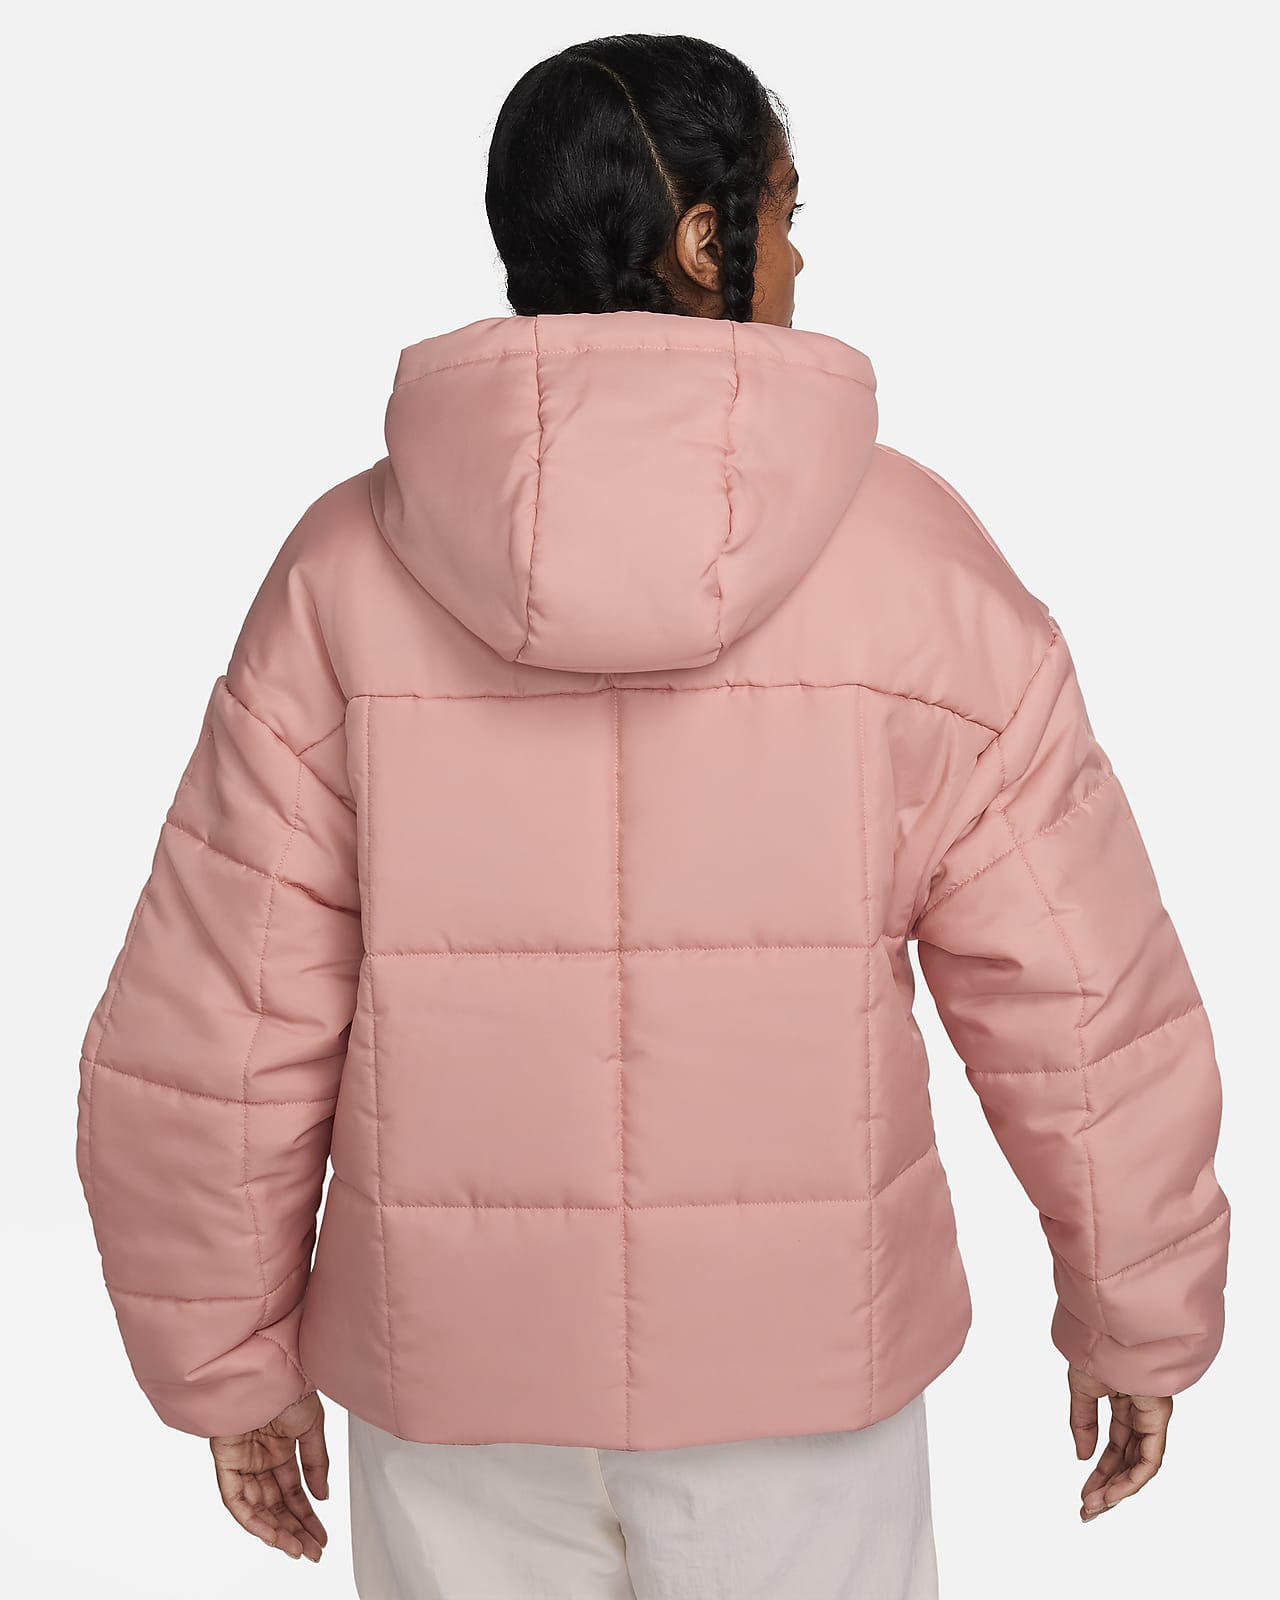 Nike Sportswear Therma-FIT Synthetic Fill Big Kids' Loose Hooded Jacket.  Nike.com